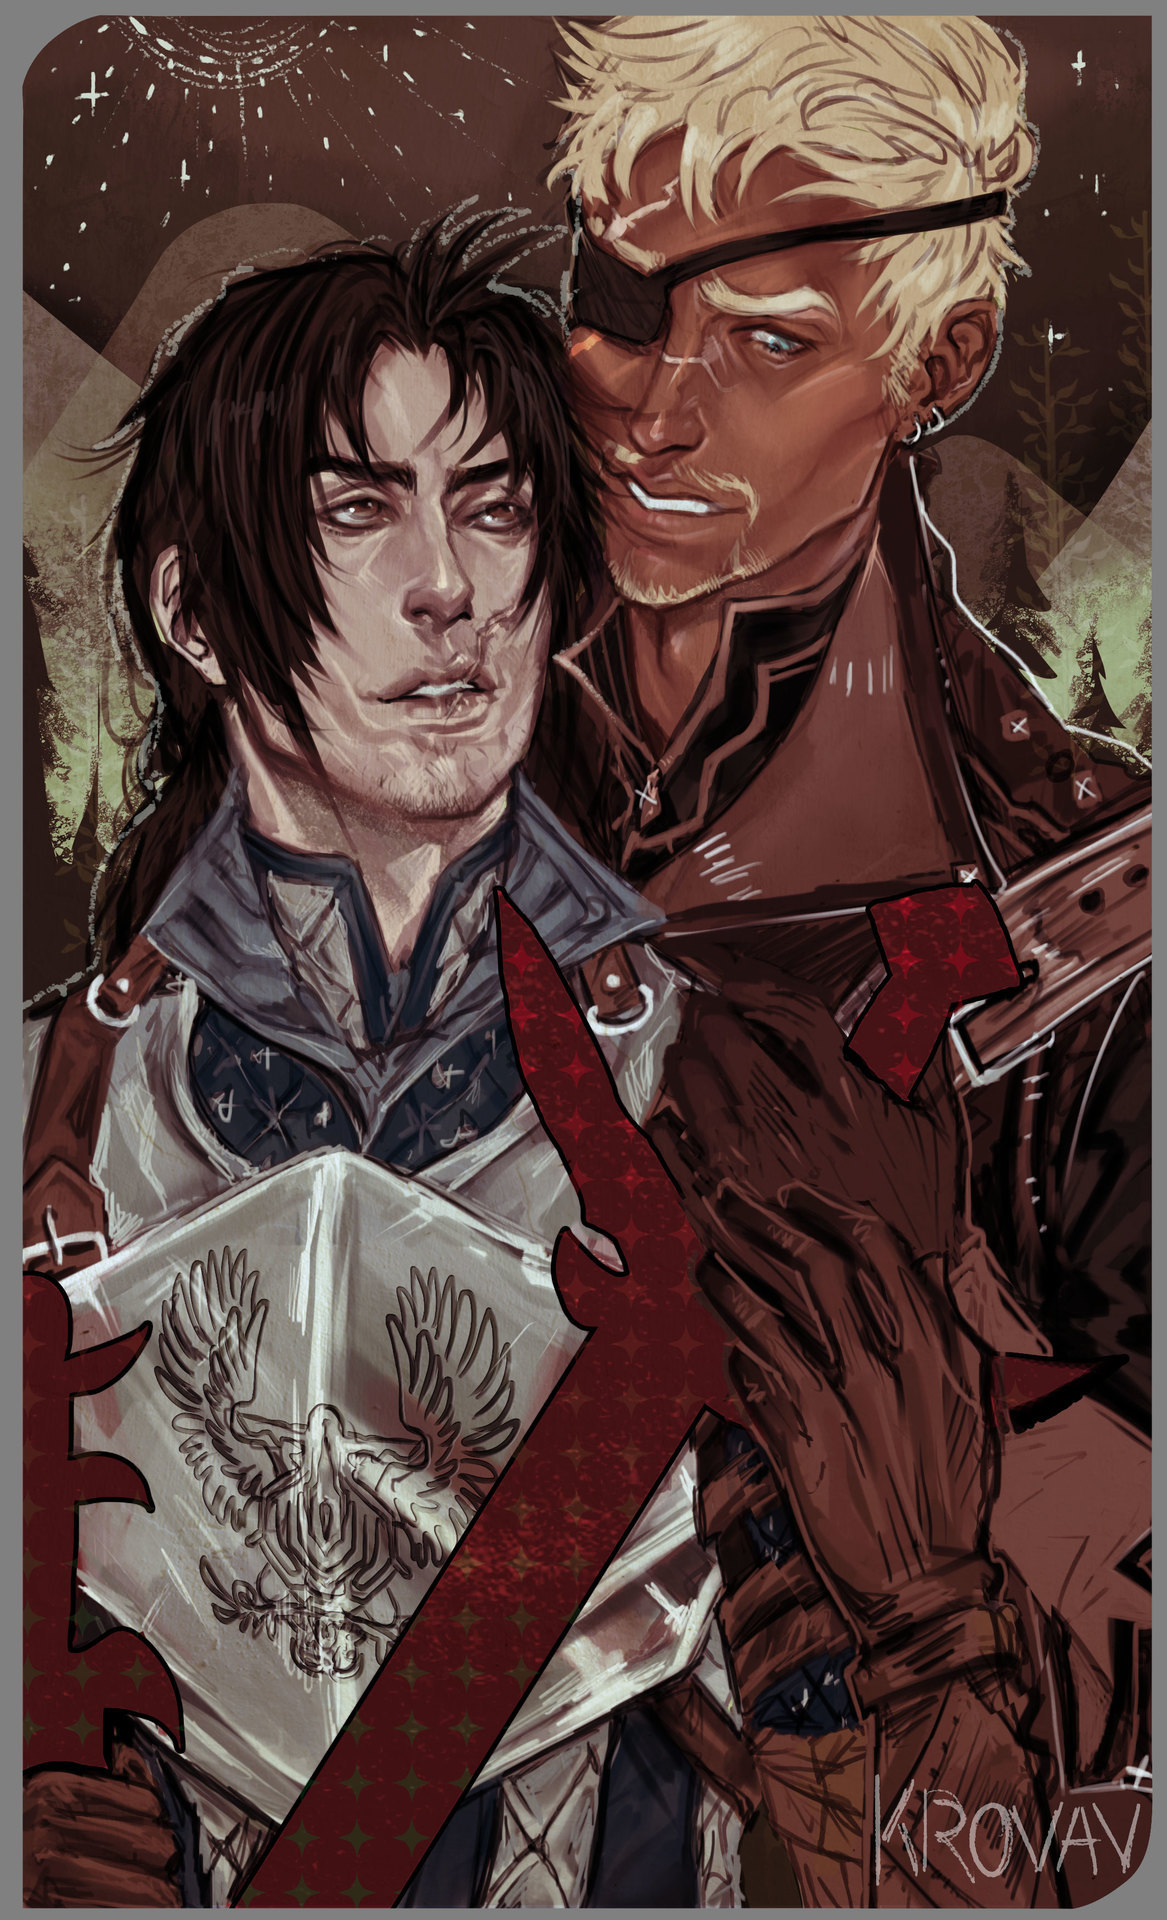 A warm and cool toned version of a tarot card commissioned by Zone of the characters